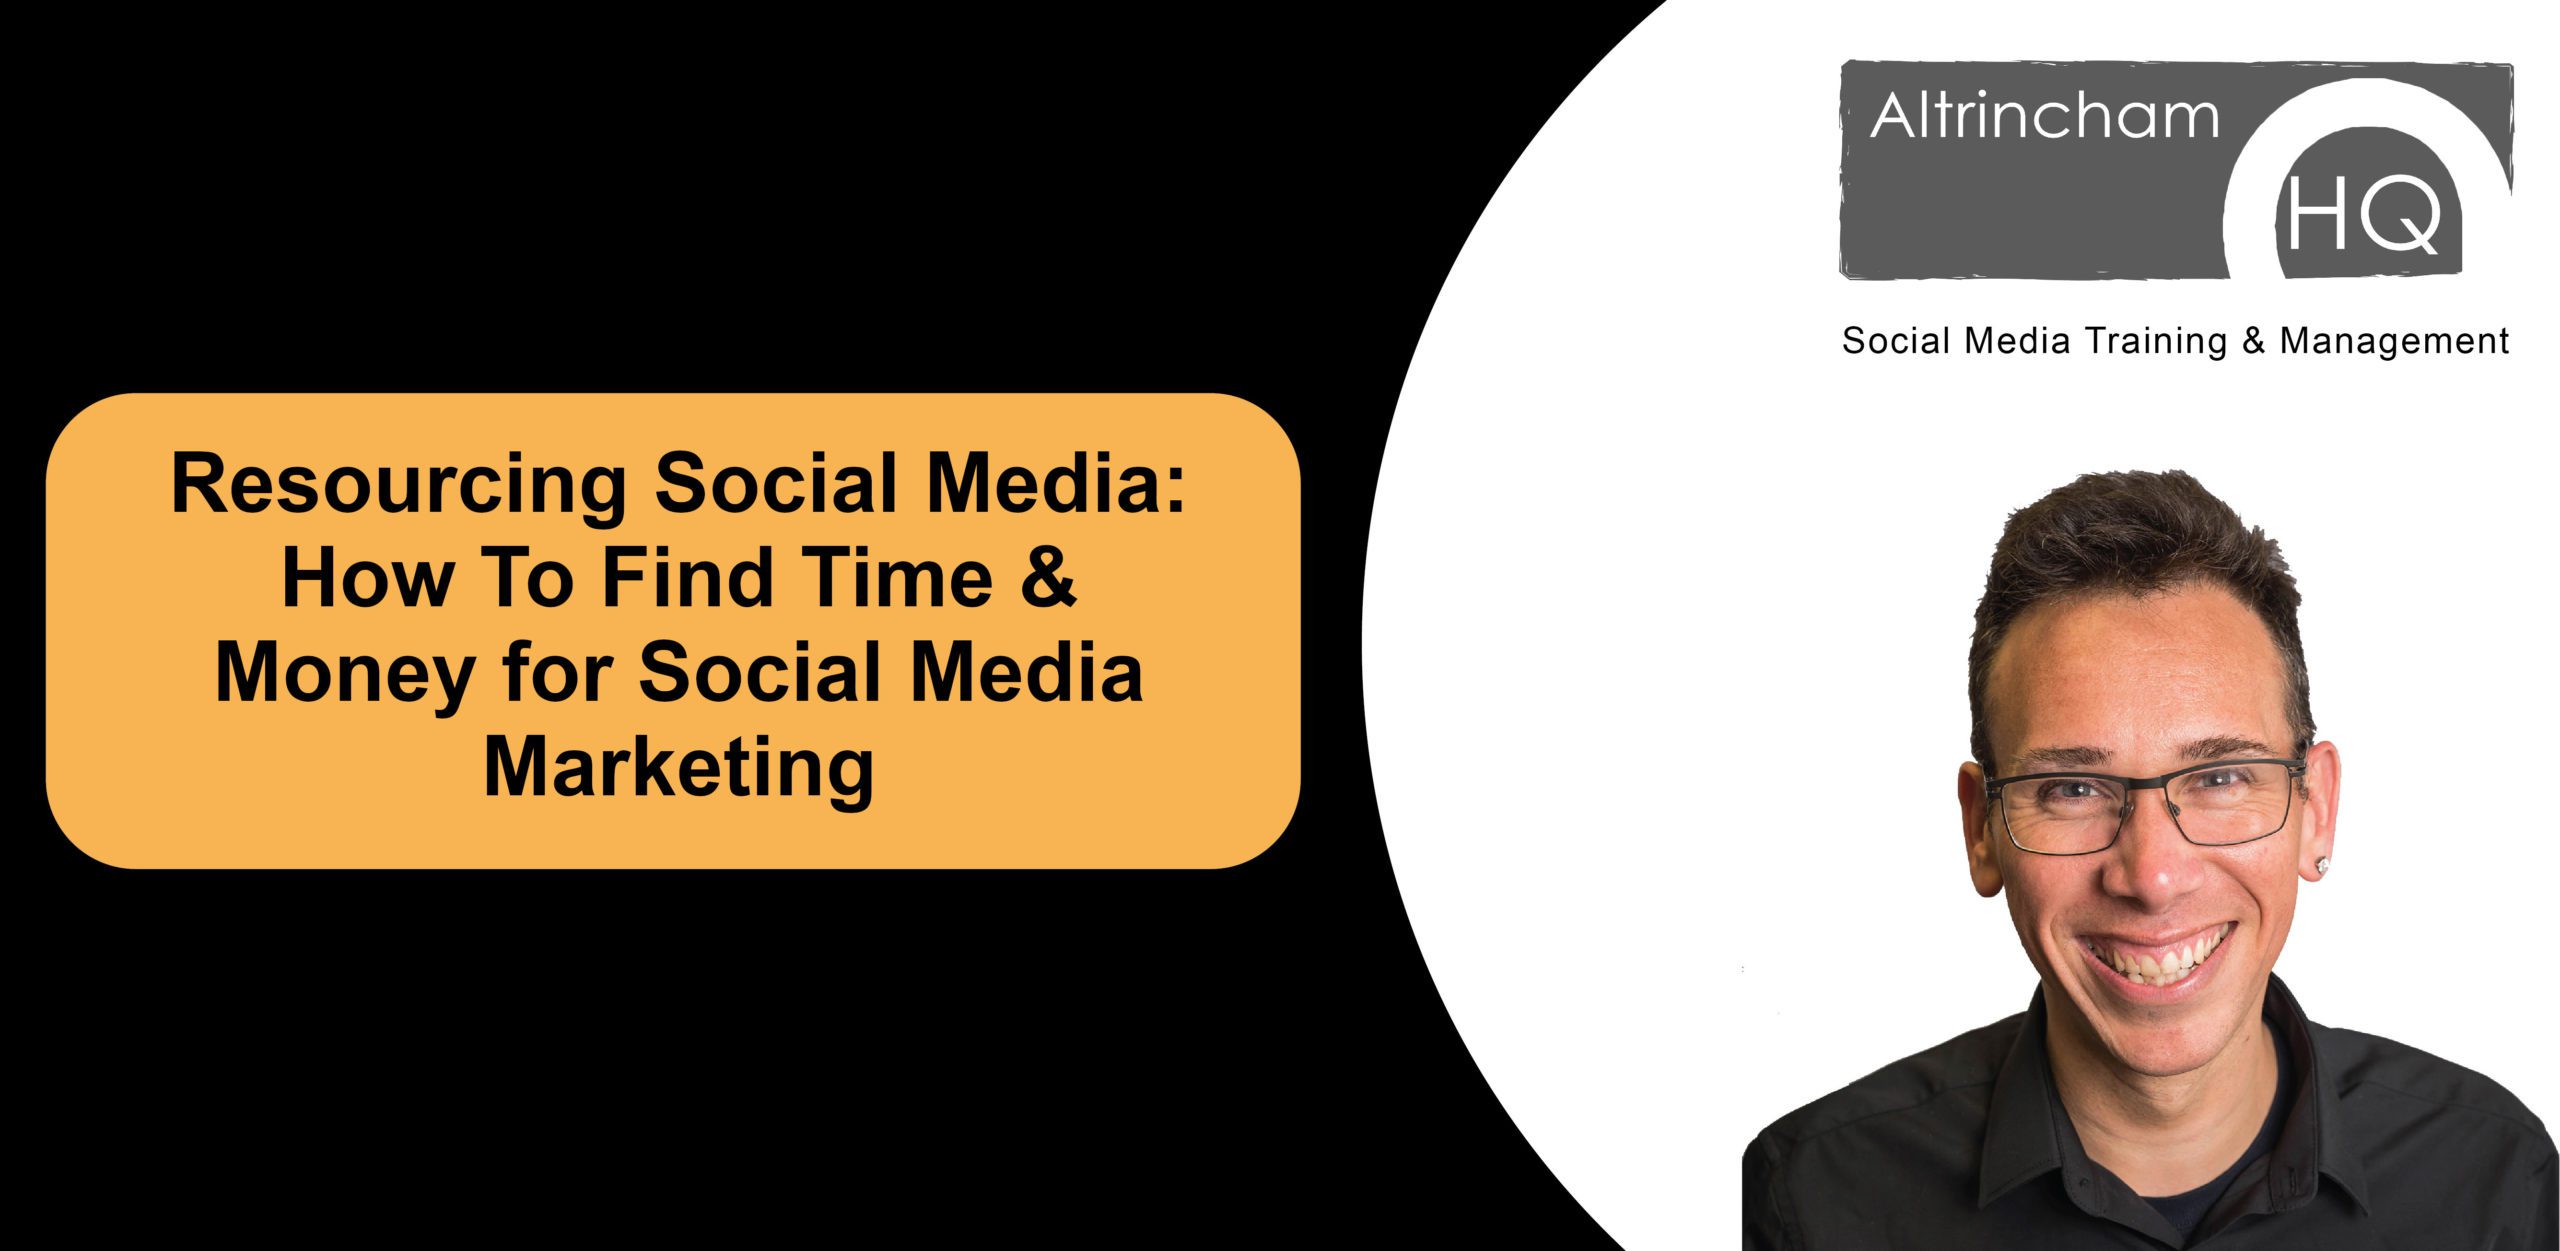 Resourcing Social Media: How To Find Time & Money for Social Media Marketing